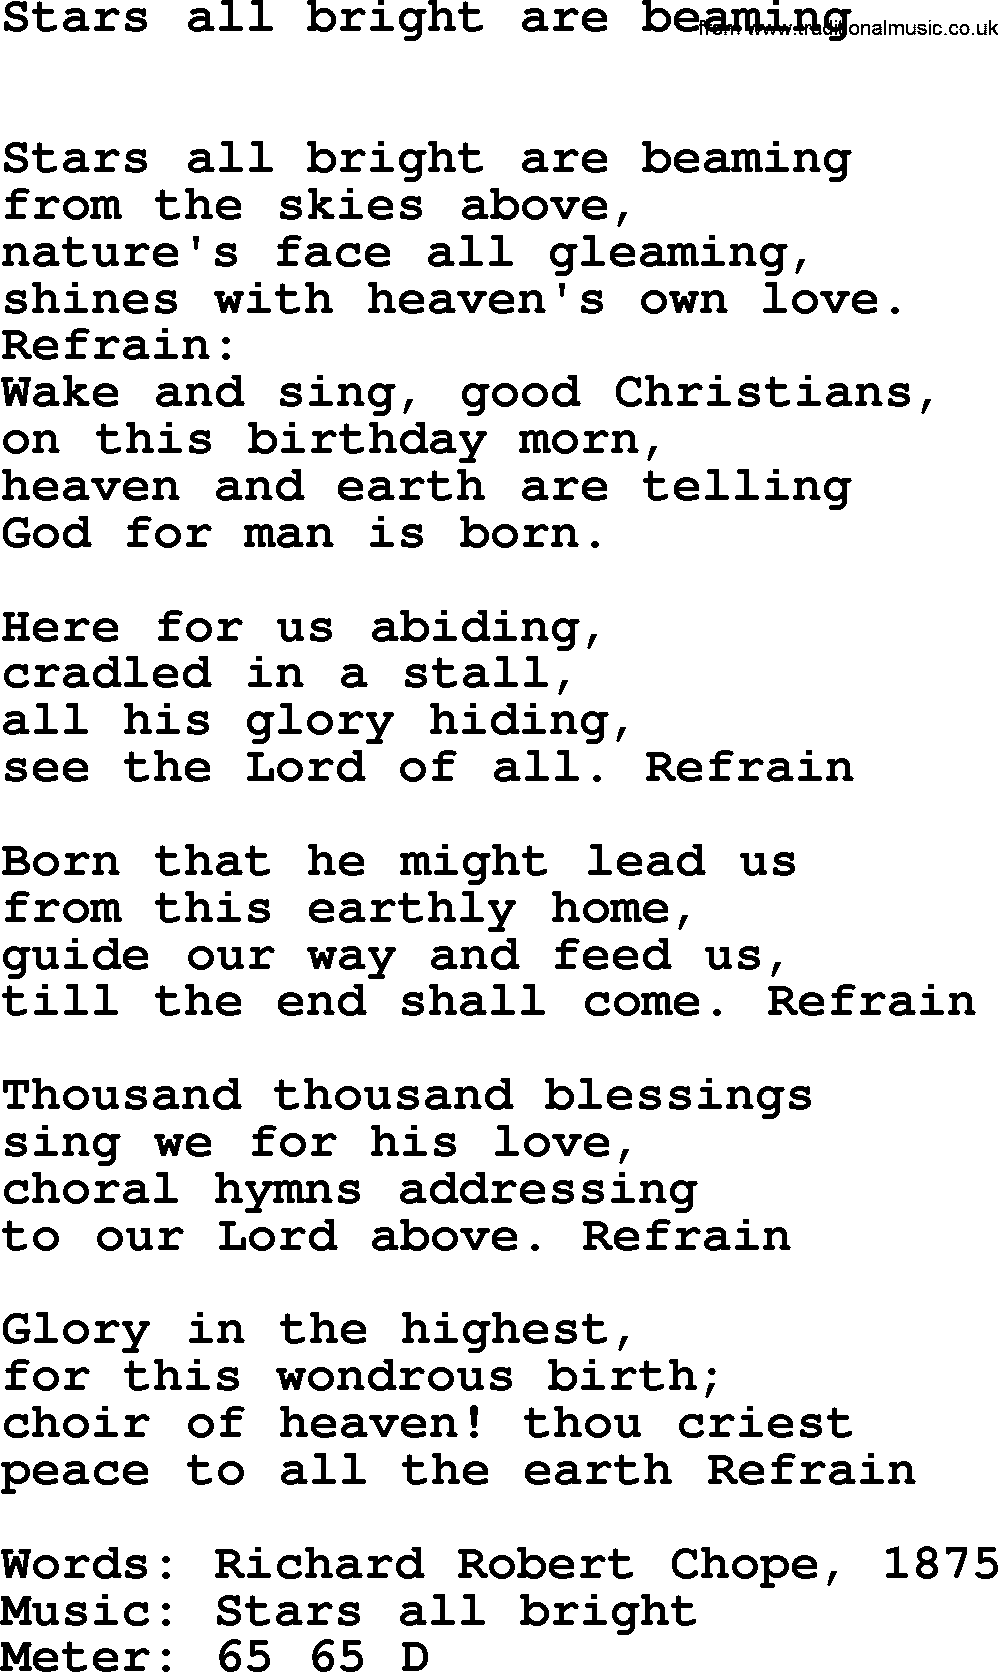 Book of Common Praise Hymn: Stars All Bright Are Beaming.txt lyrics with midi music